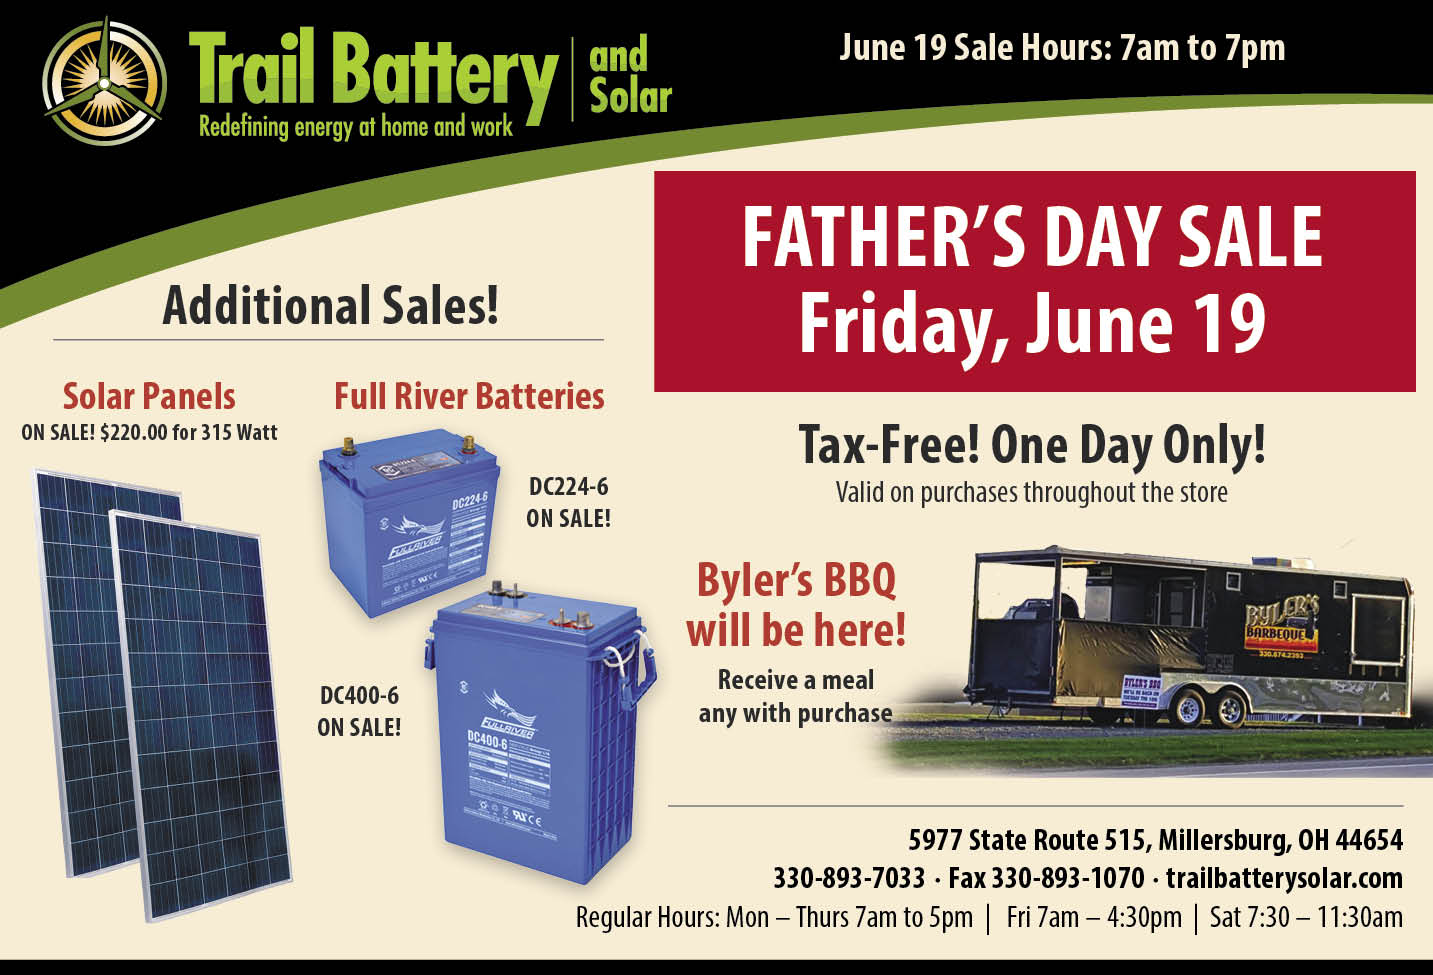 Father's Day Sale at Trail Battery and Solar